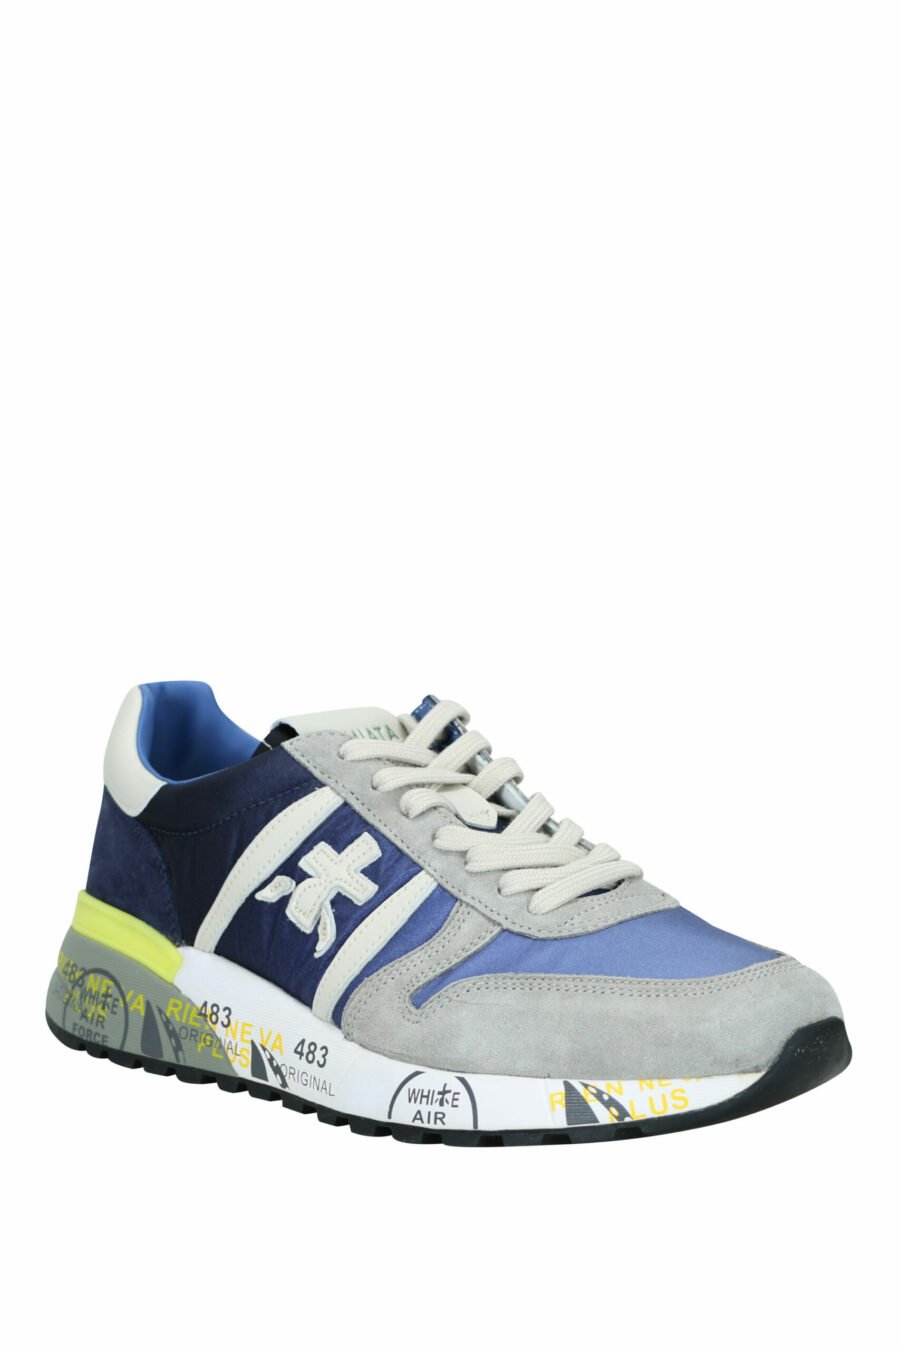 Blue trainers in degradé with grey "Lander 4587" - 8058325170603 1 scaled